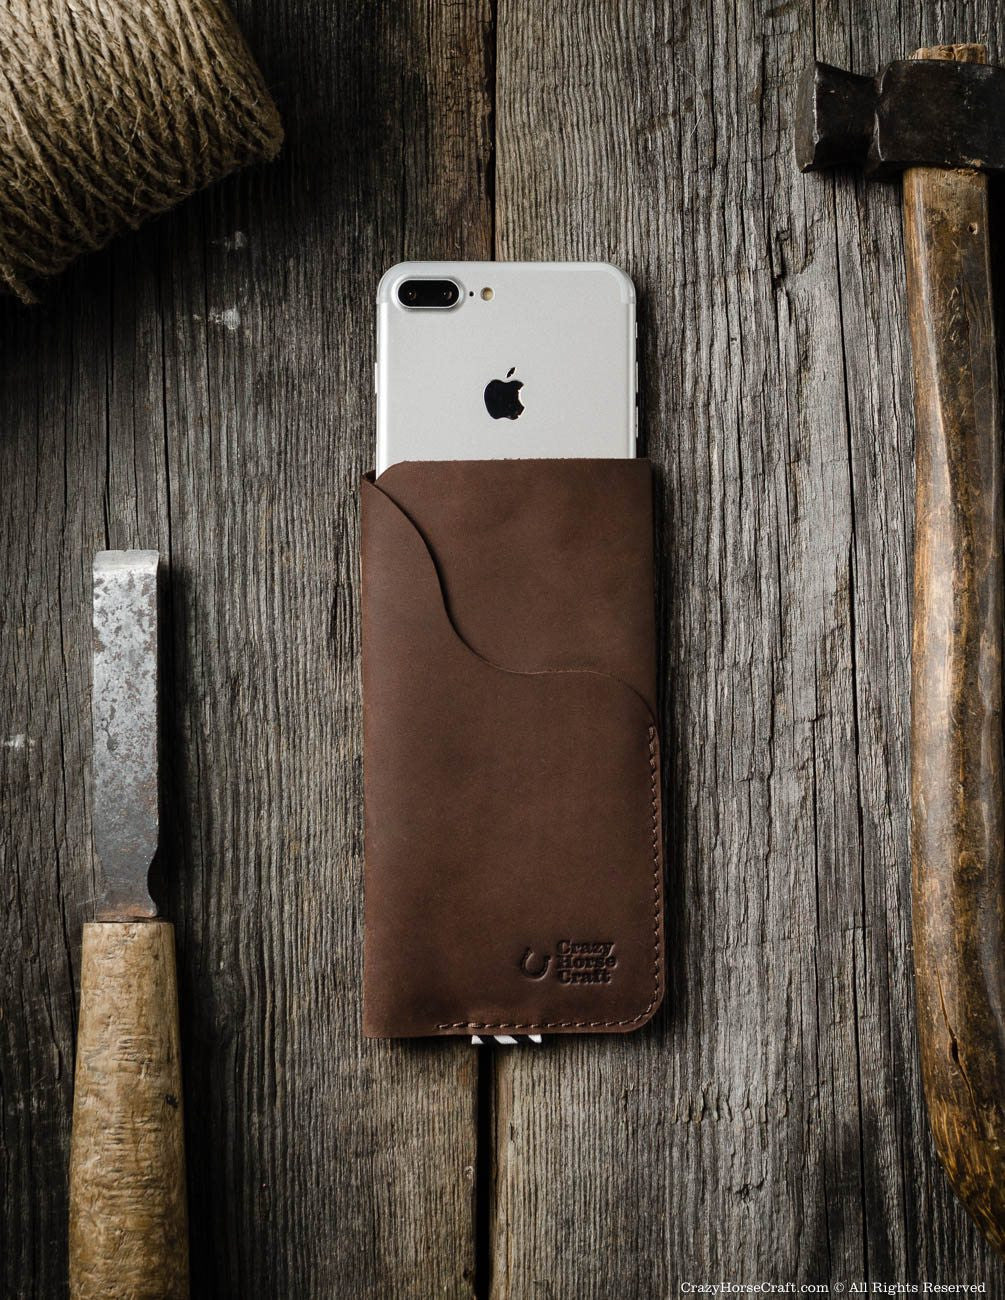 iPhone Xs, iPhone Xr case, leather Xs Max case, iPhone Xs sleeve, wallet, cool iphone Xs cover, Leather iPhone 7 plus Case with Card Pocket brown